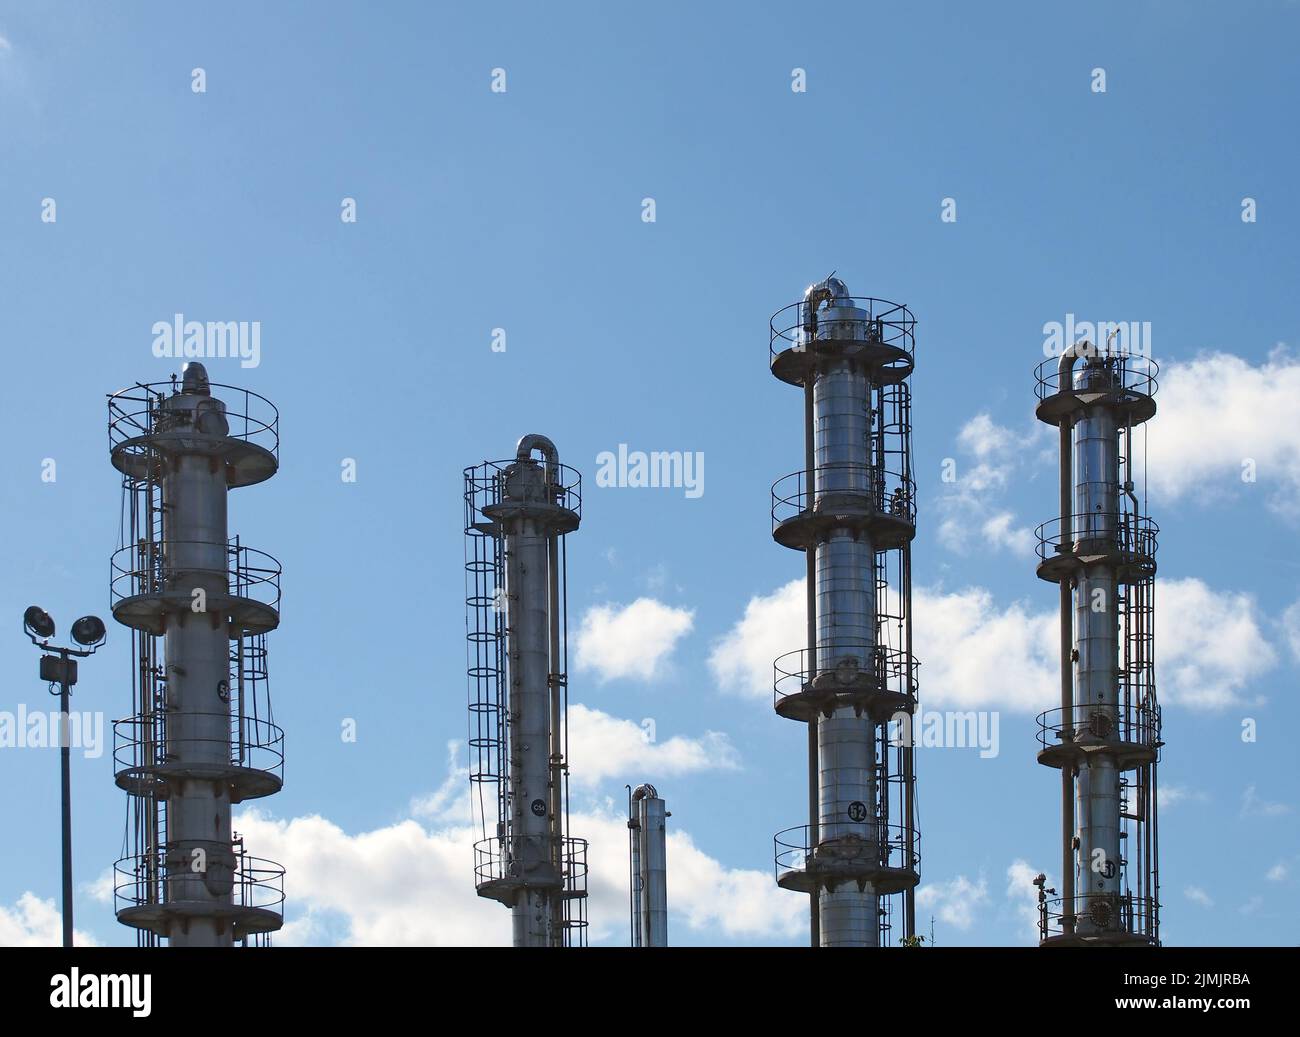 Tall steel fractionation or cooling towers at a large industrial chemical plant Stock Photo